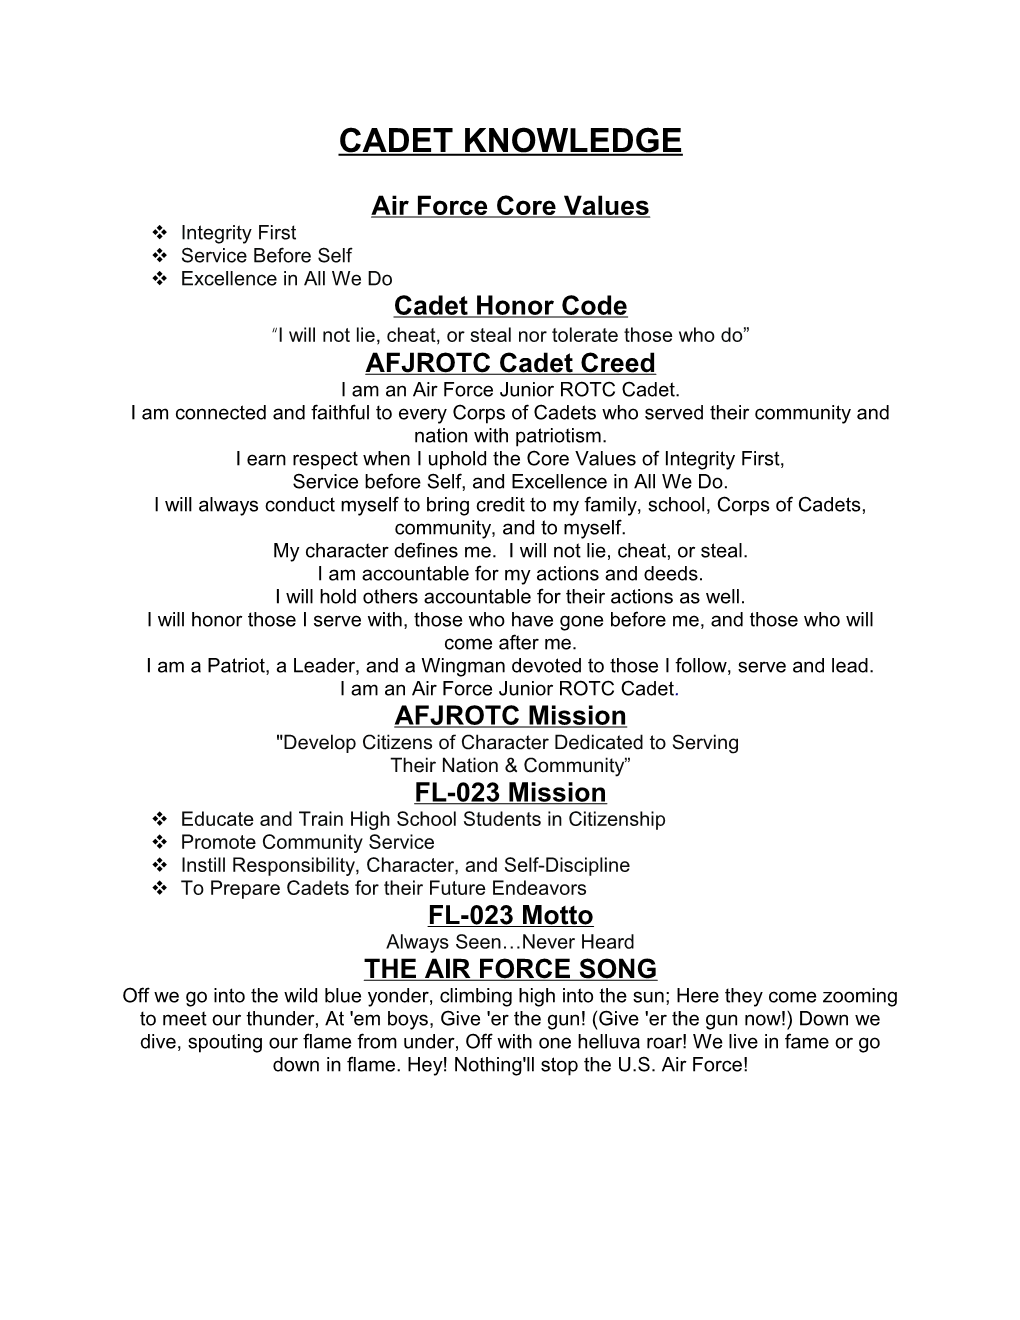 Air Force Core Values